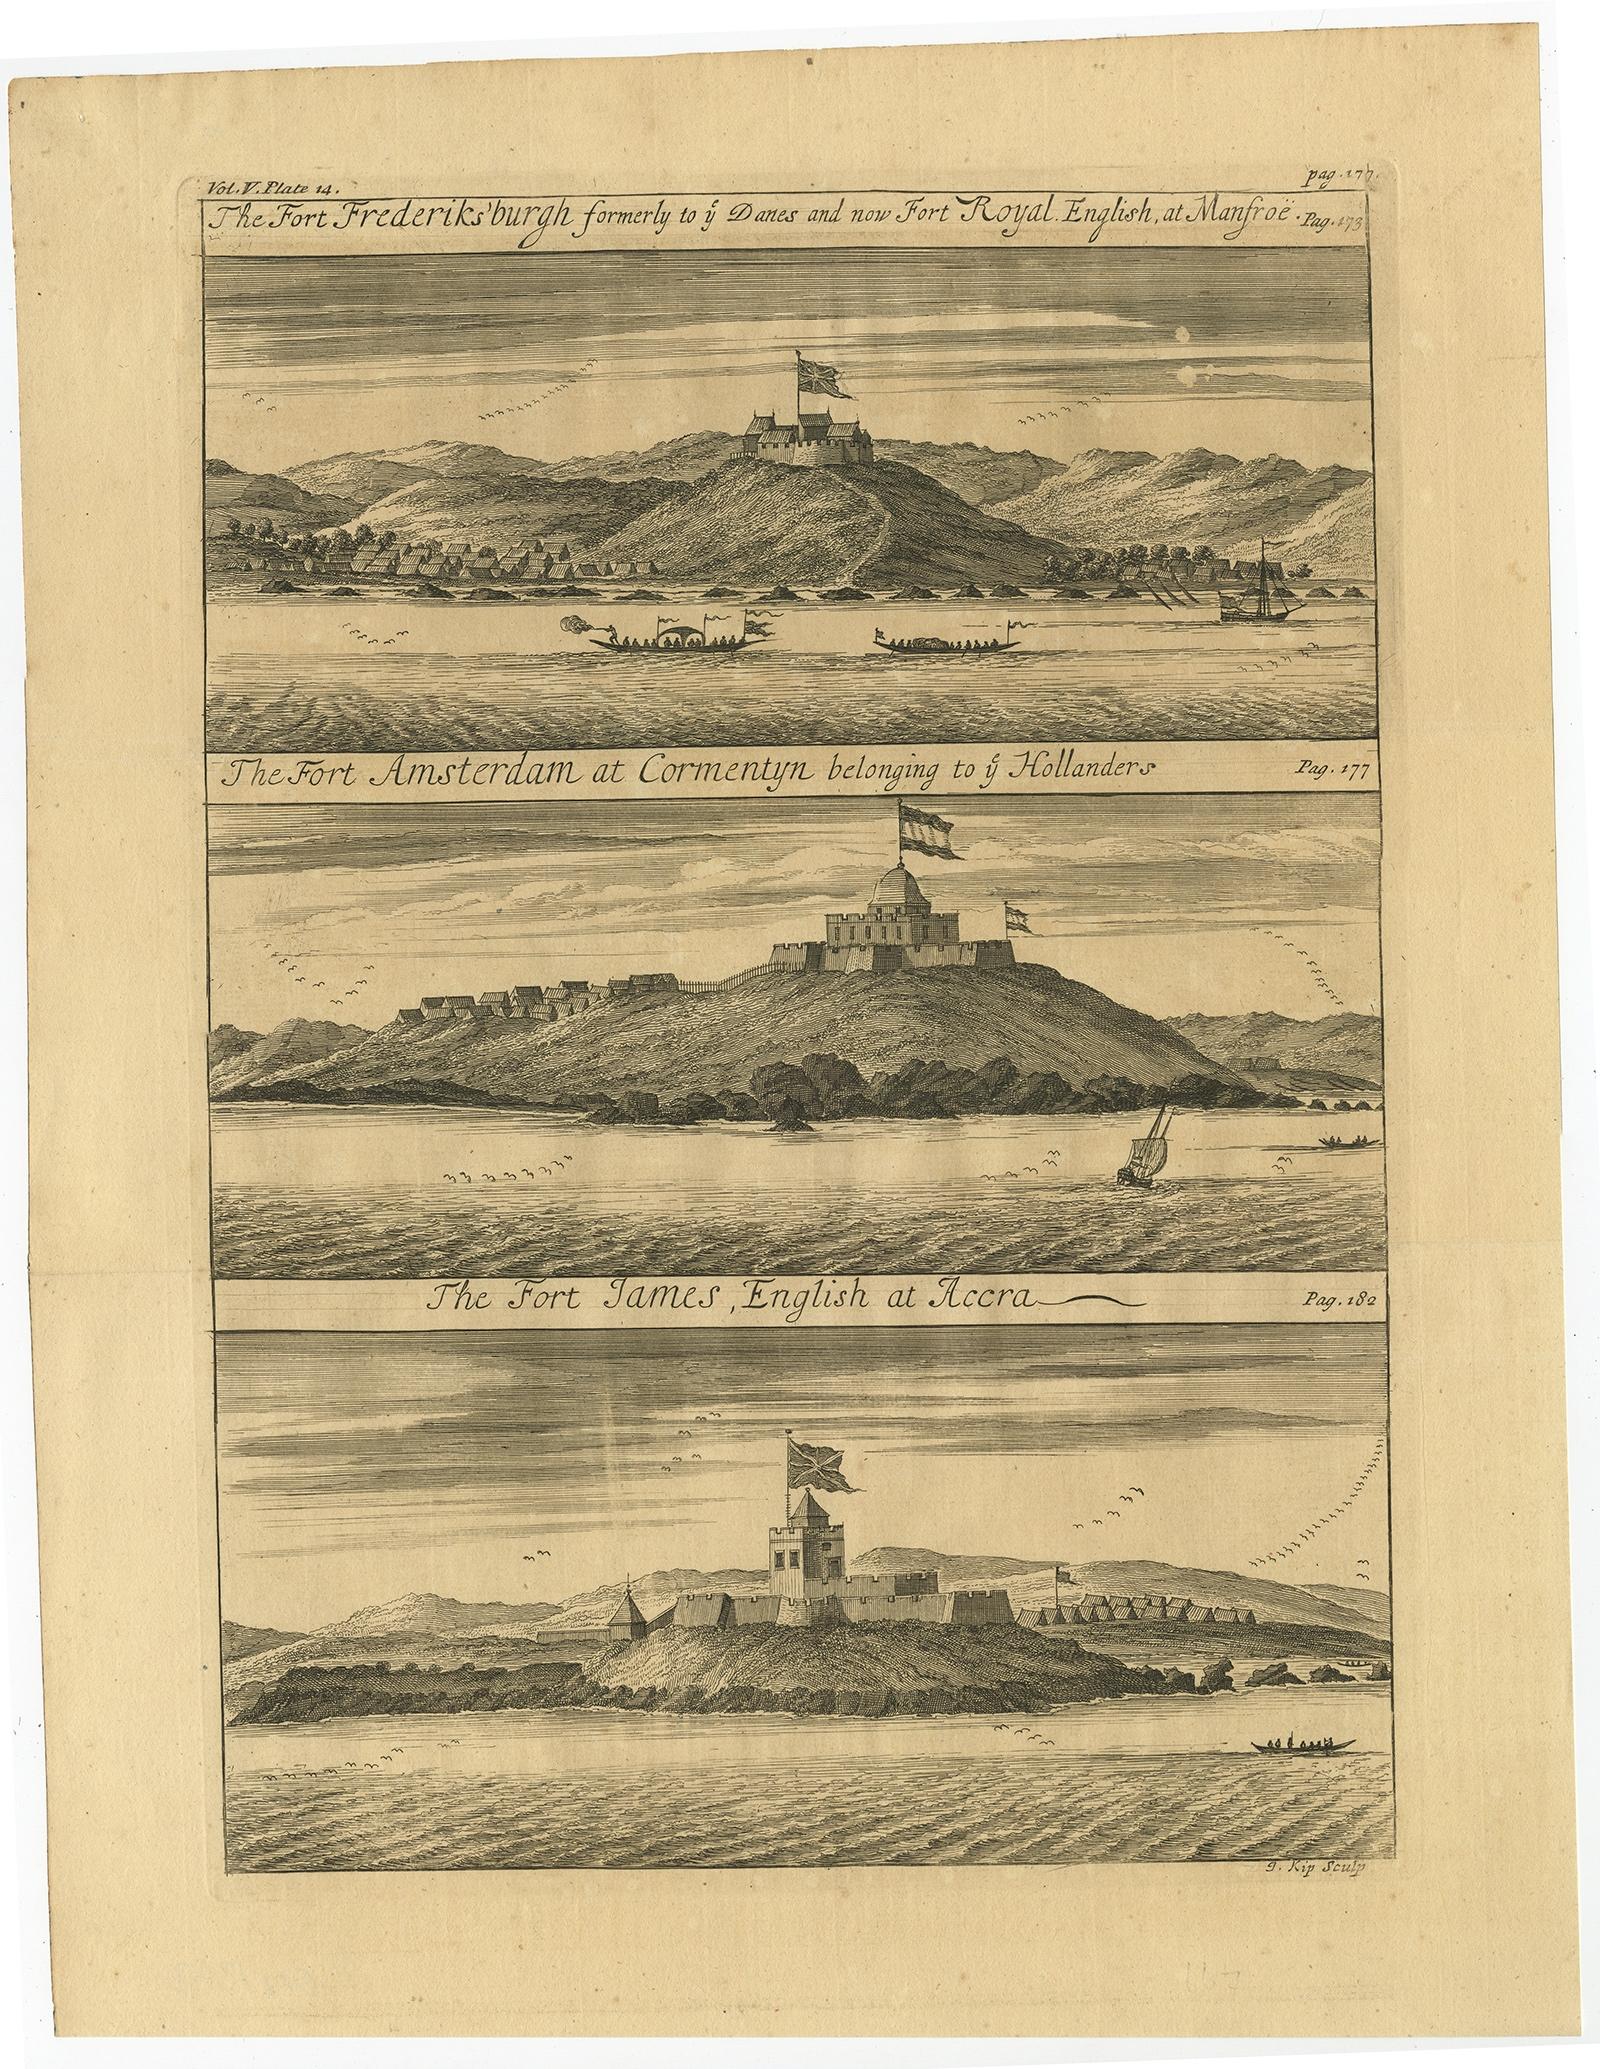 Antique print, titled: 'The Fort Fredricksburg formerly to ye Danes and now Fort Royal (…).' - A three panel copperplate engraving showing three forts on the West African Gold Coast, Ghana; a) The Fort Fredricksburgh formerly to ye Danes and now